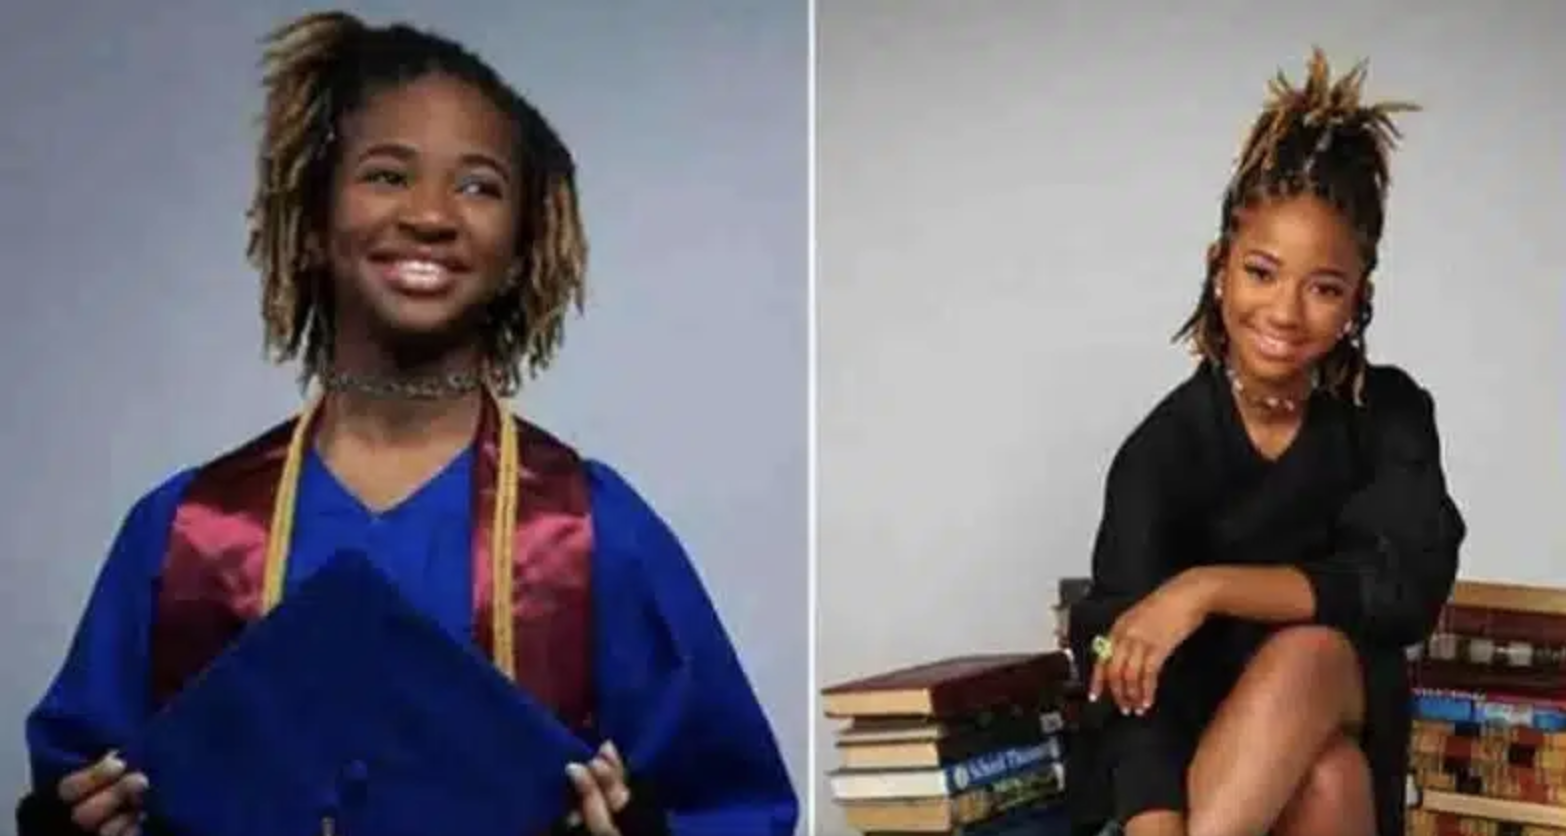 12-Year-Old Girl Earns Spot at Arizona State University, Aims to Graduate as Engineer by 16.